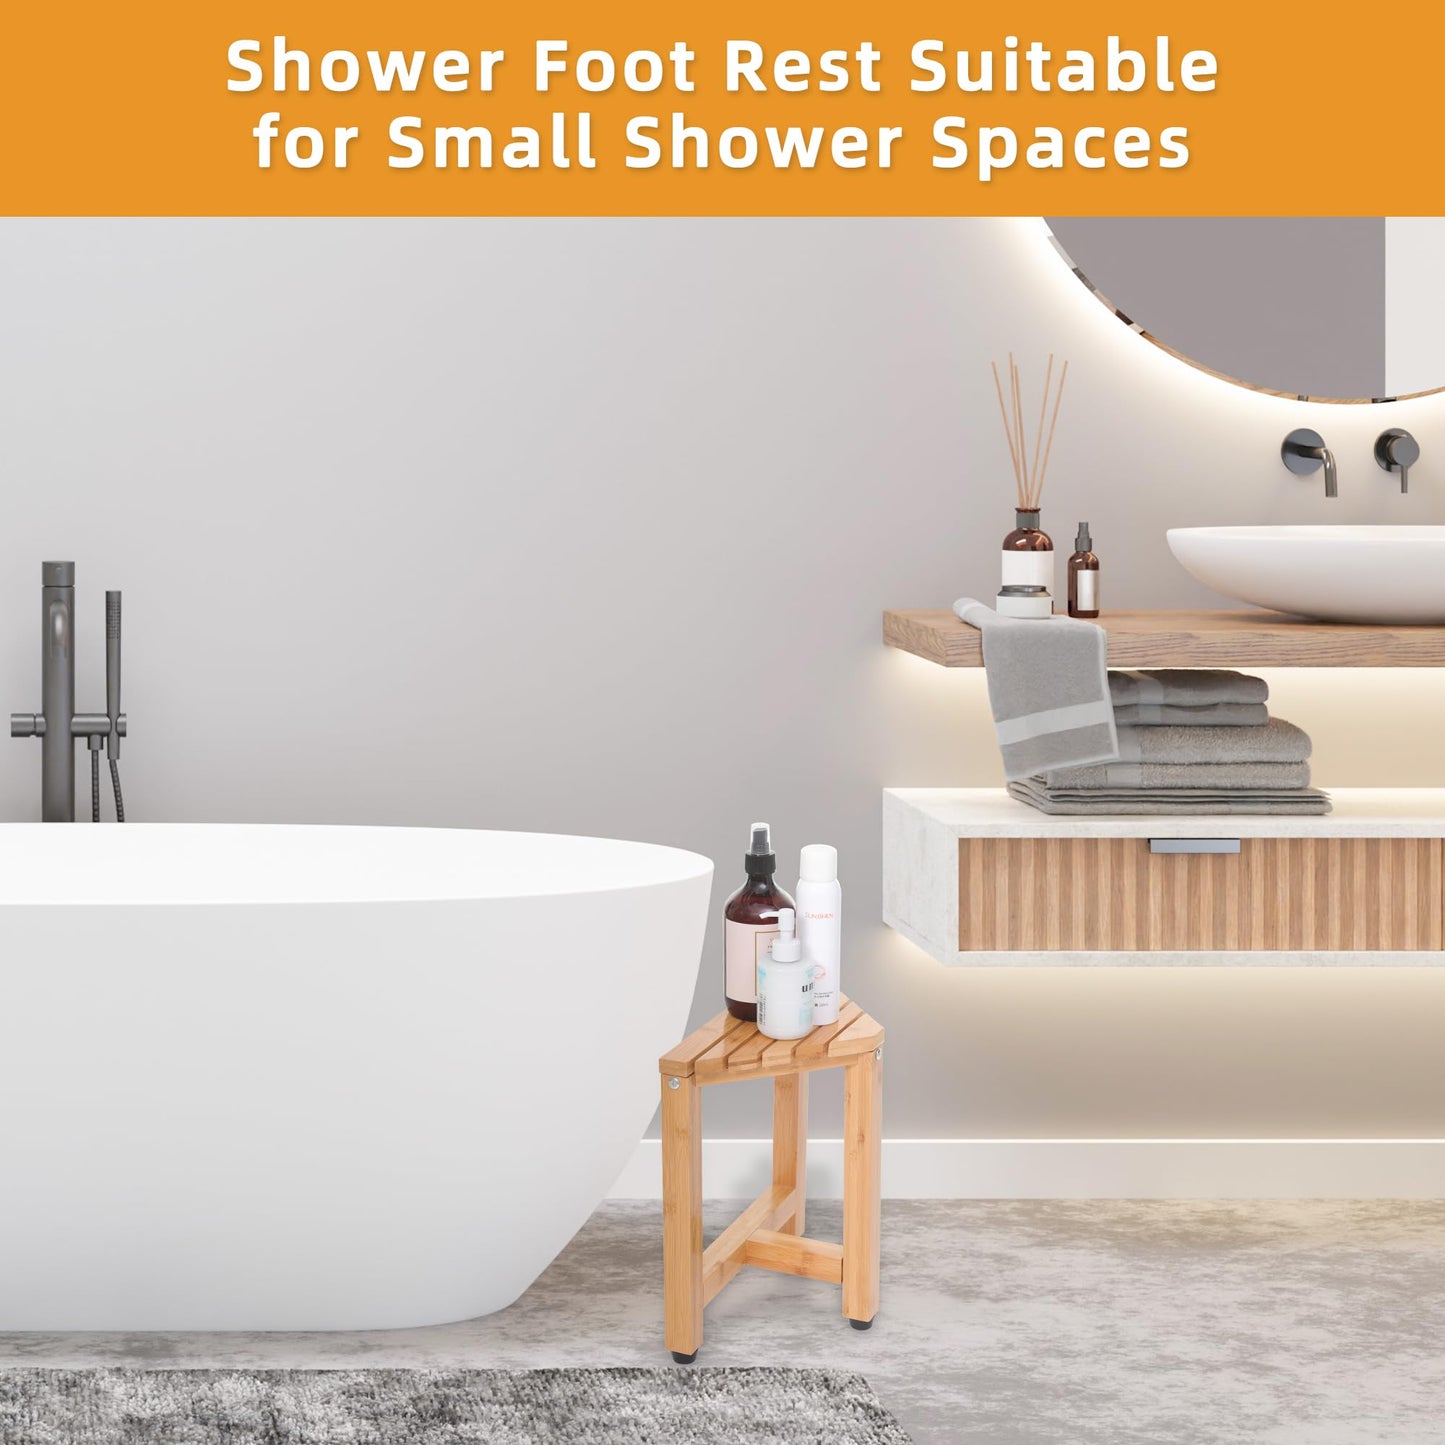 TYYIHUA 13.2" Shower Foot Rest for Shaving Legs,Corner Shower Stool, Small Bathroom Bench Suitable for Small Shower Spaces-Waterproof Shower Stool for Inside Shower Triangle